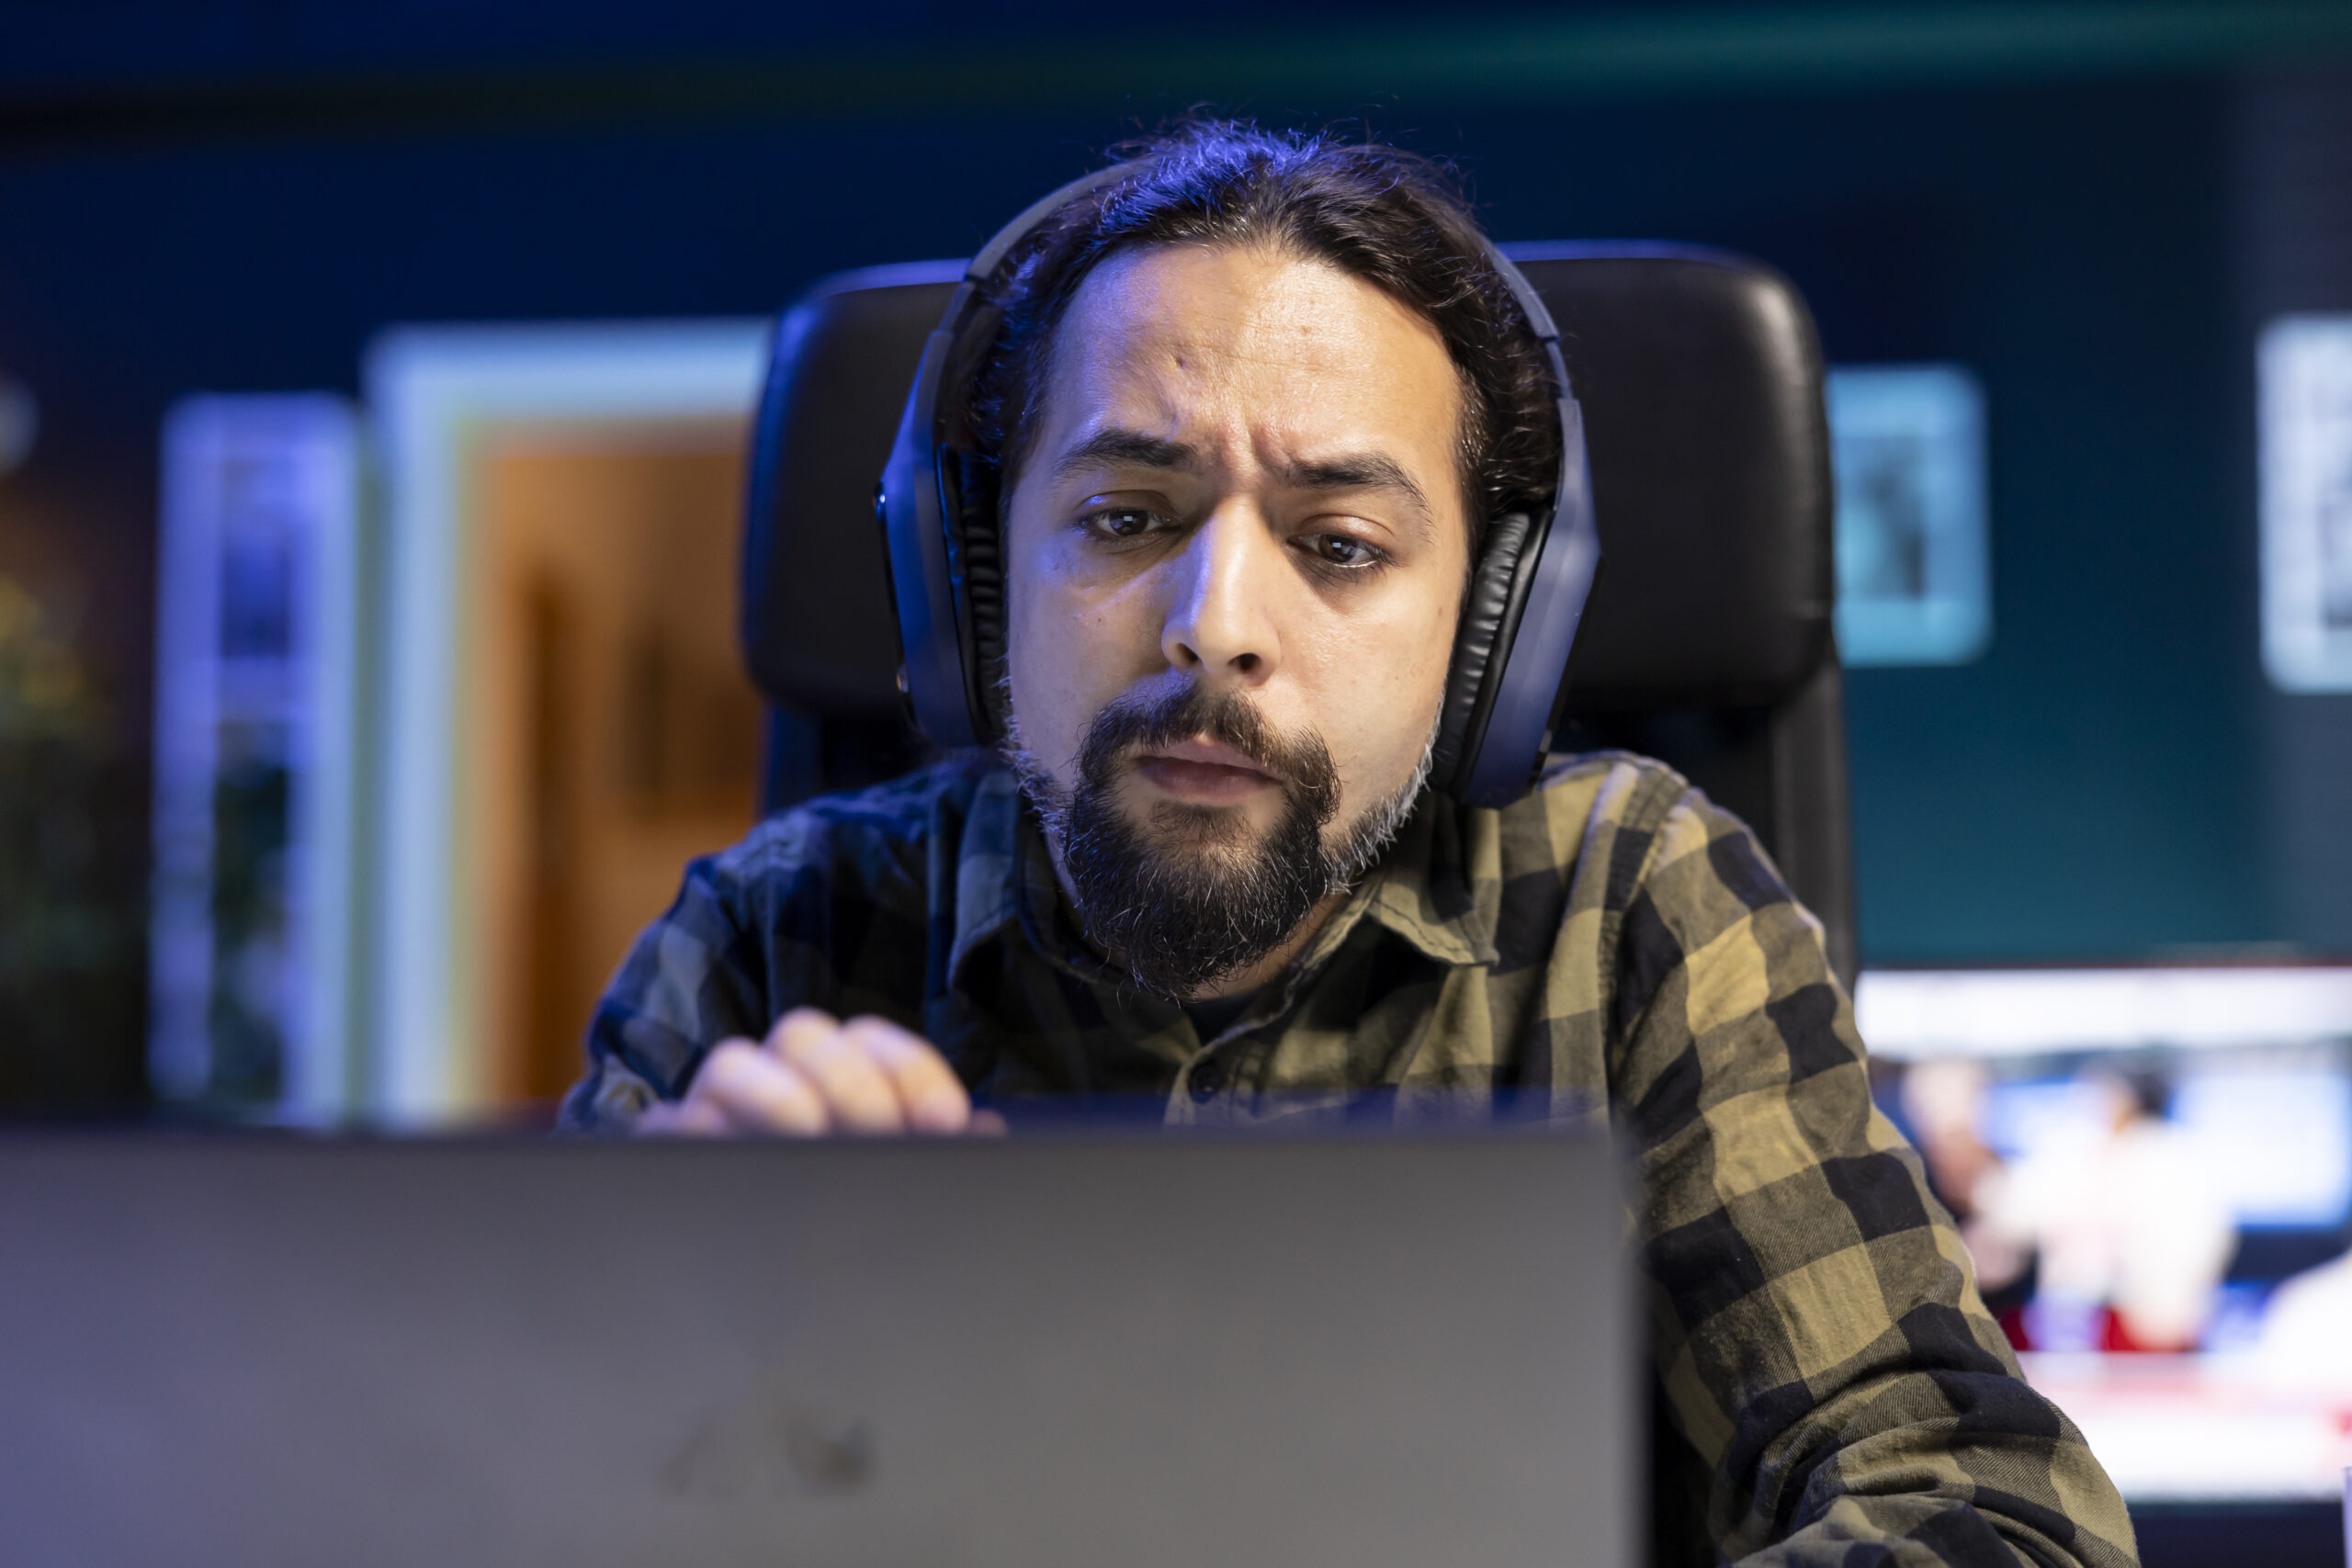 Man with headphones looking at laptop